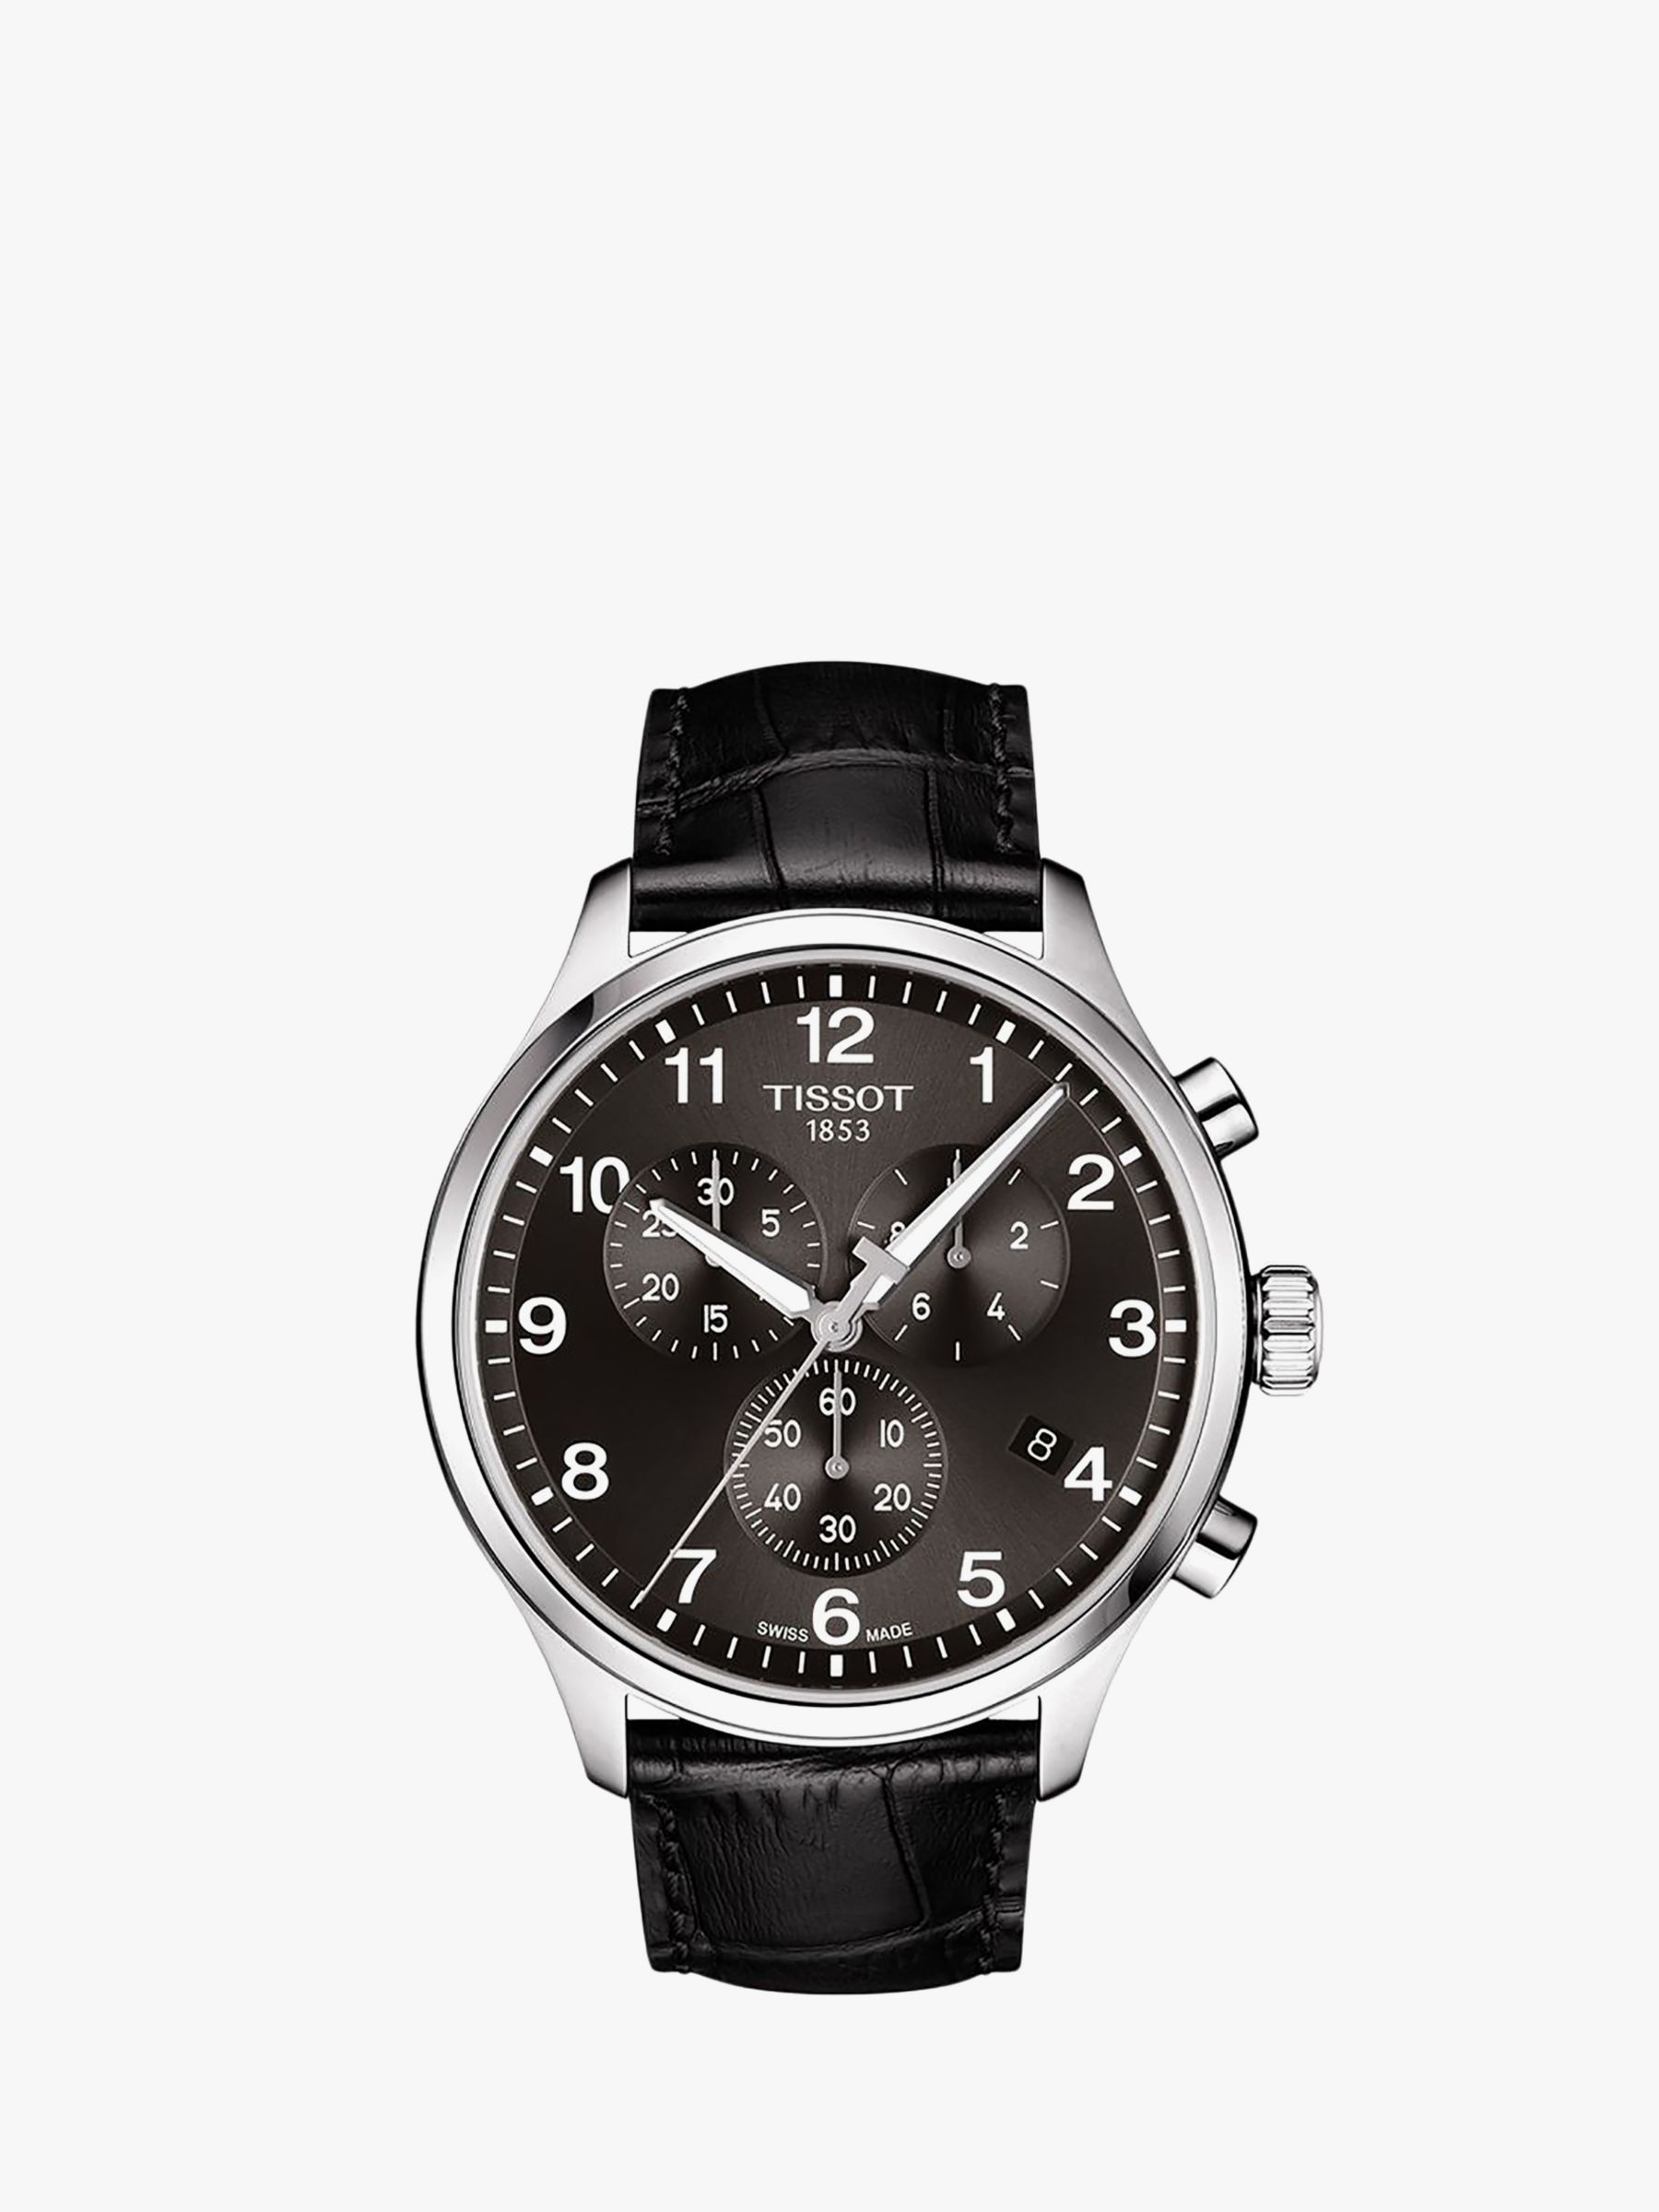 Buy Tissot T1166171605700 Men's Classic Chronograph Date Leather Strap Watch, Black Online at johnlewis.com